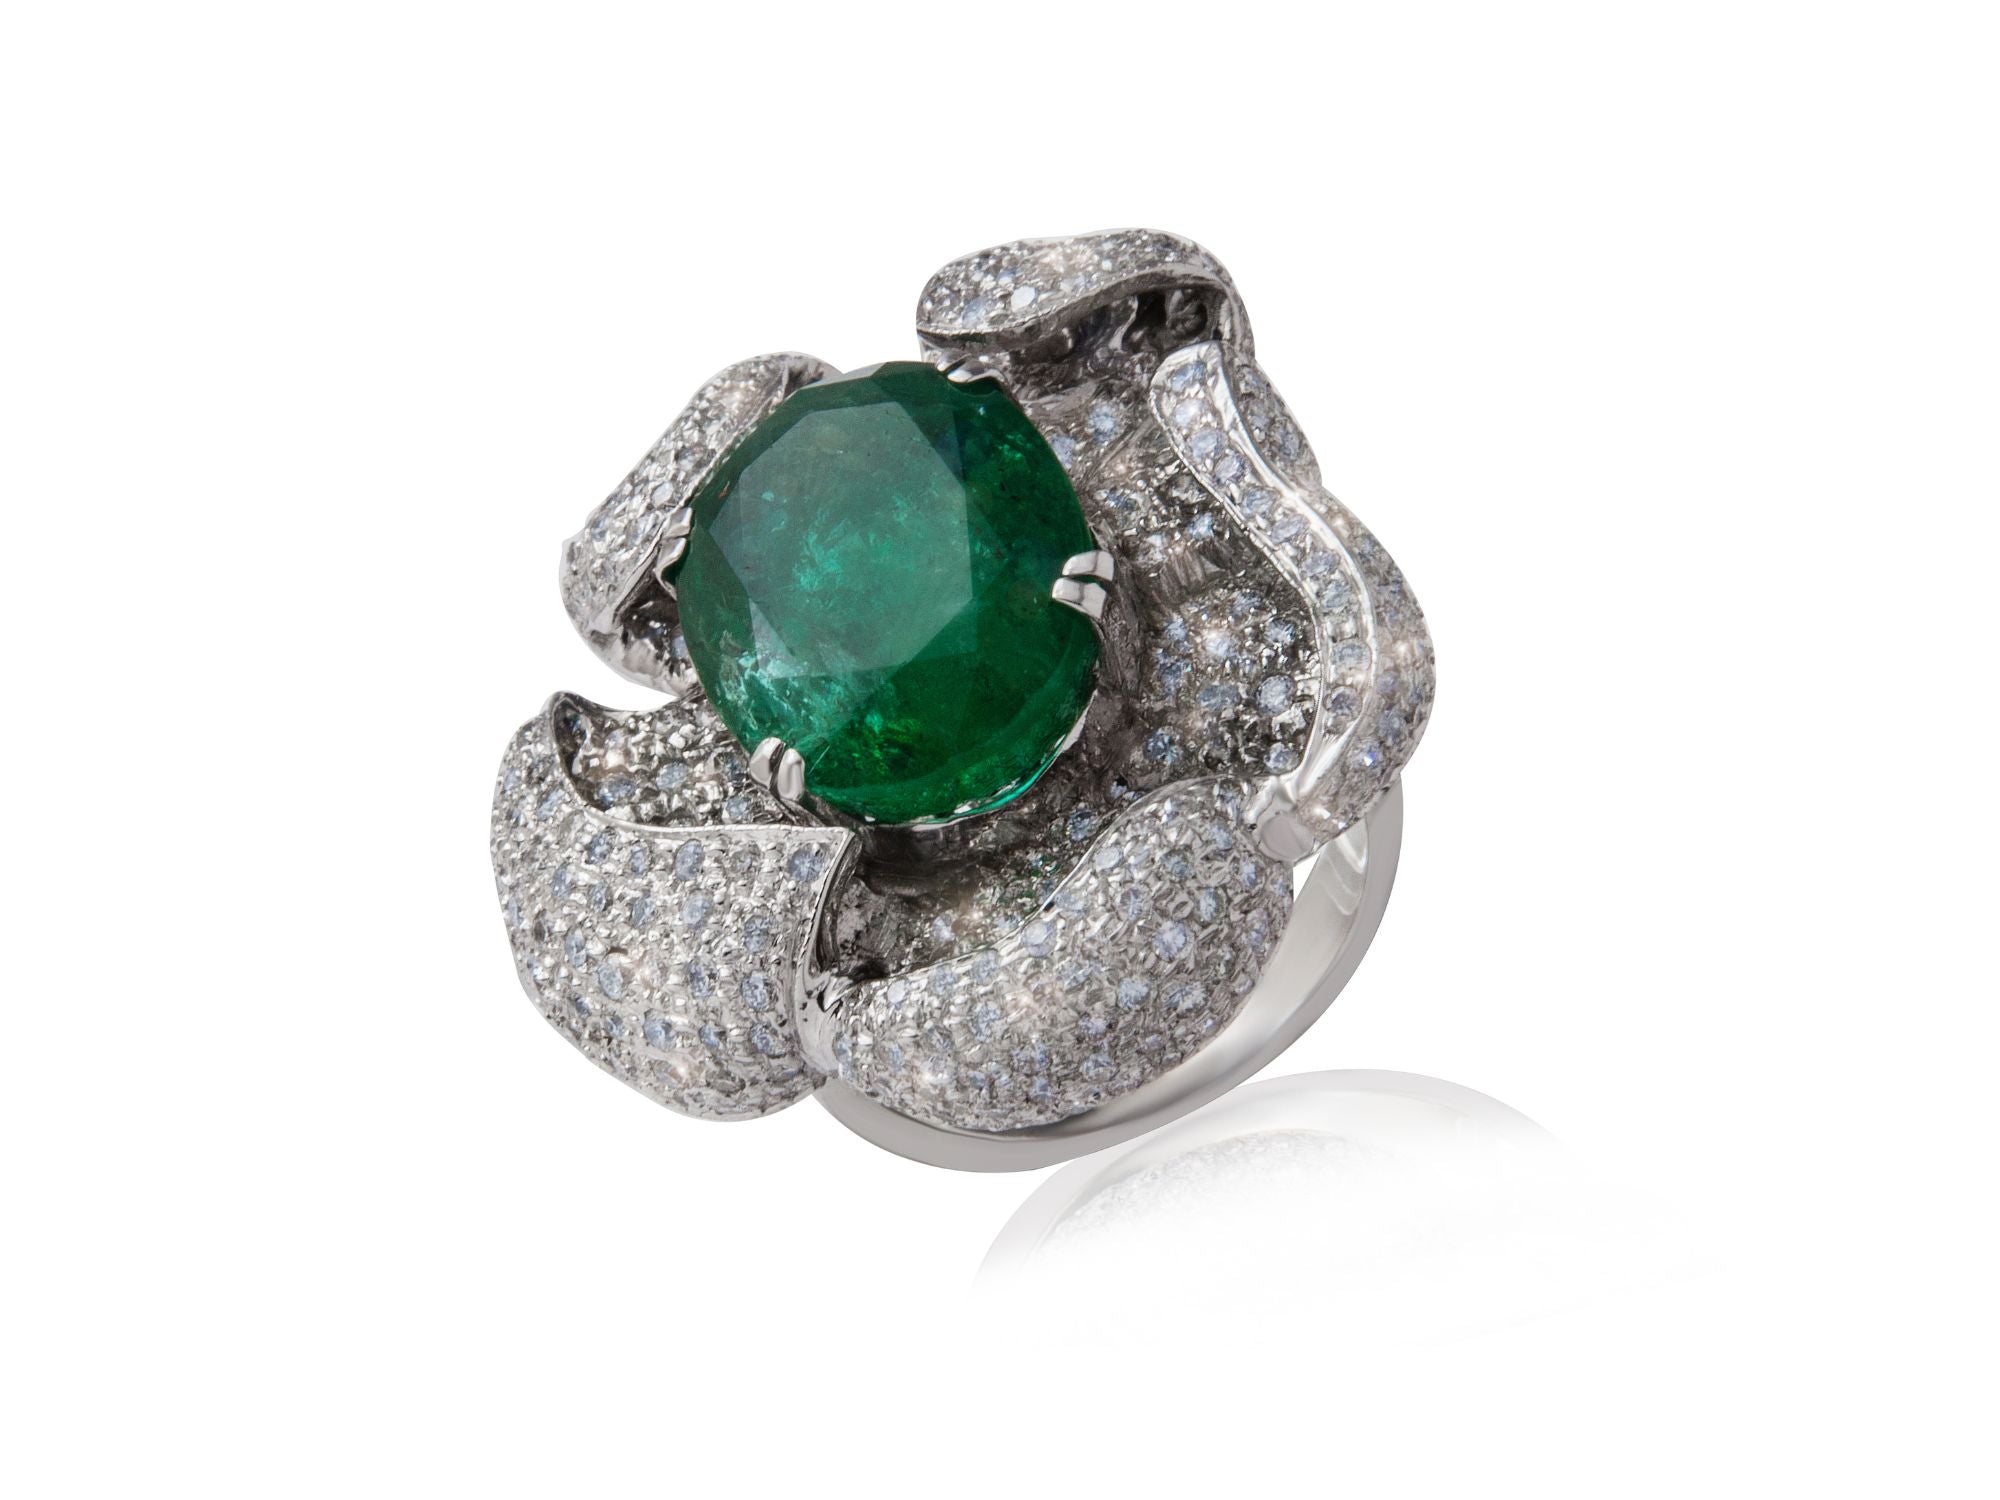 Emerald Rings as Timeless Valentine's Day Gifts | Sheena Stone